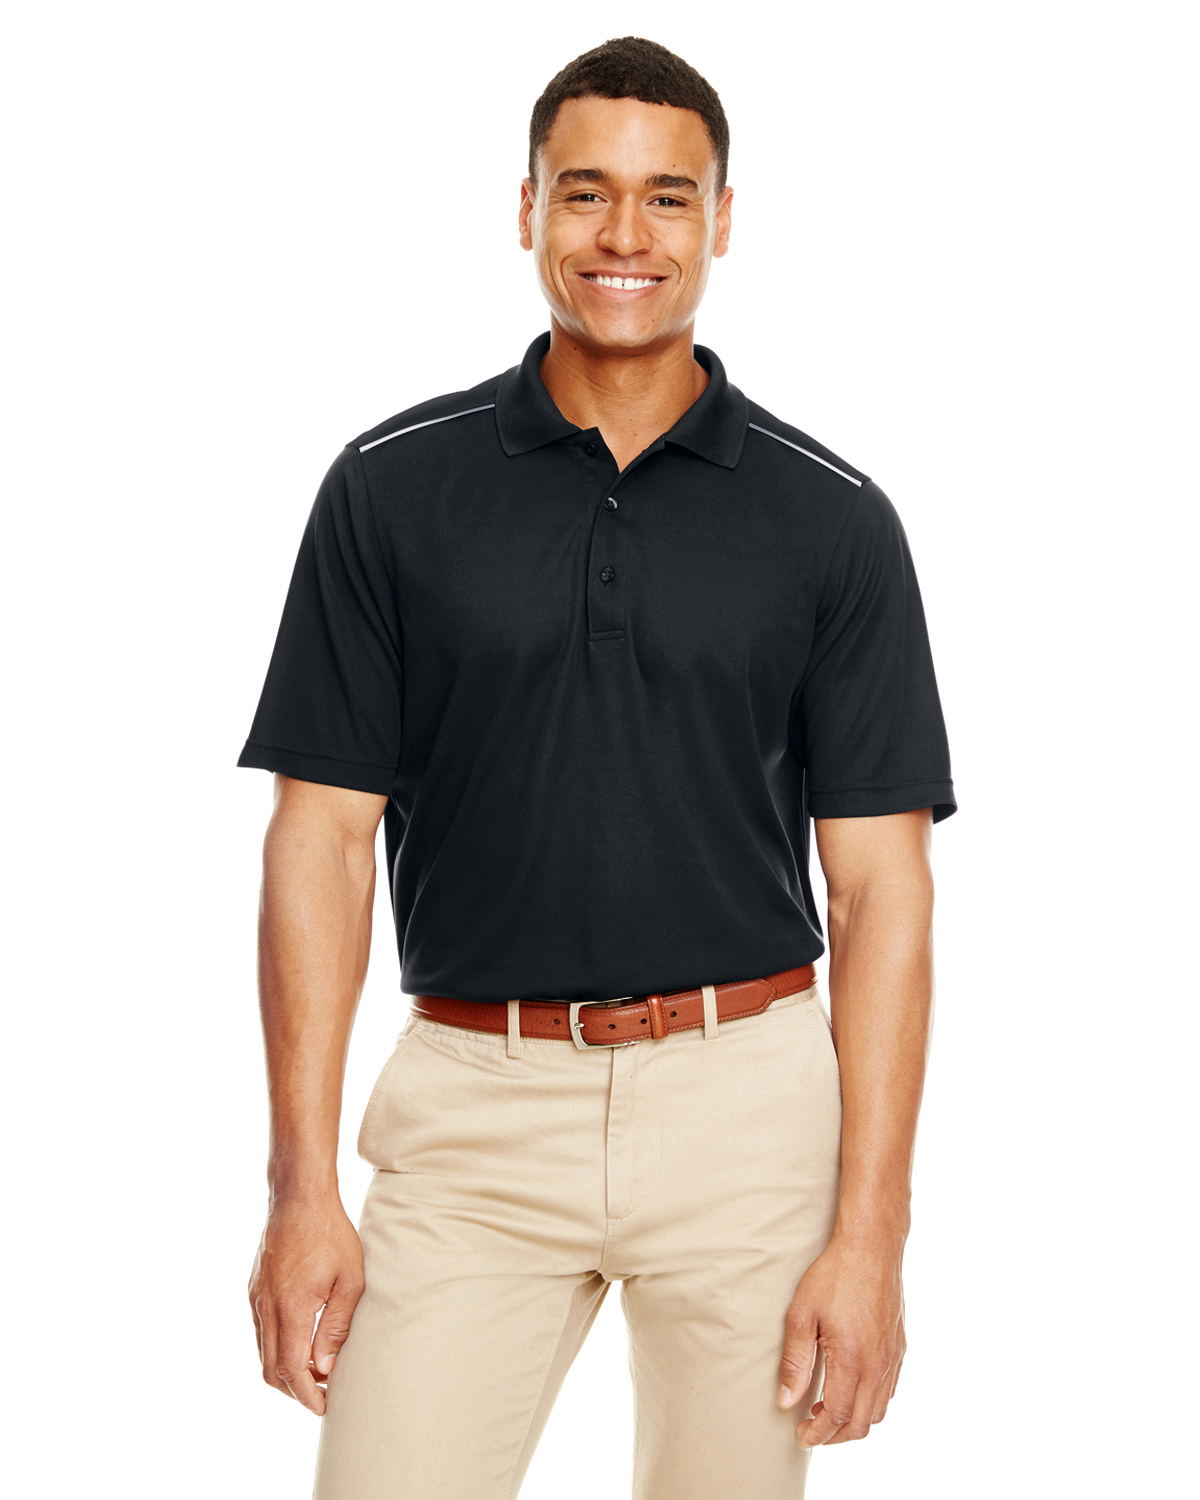 Core 365 88181R - Men's Radiant Performance Pique Polo with Reflective Piping